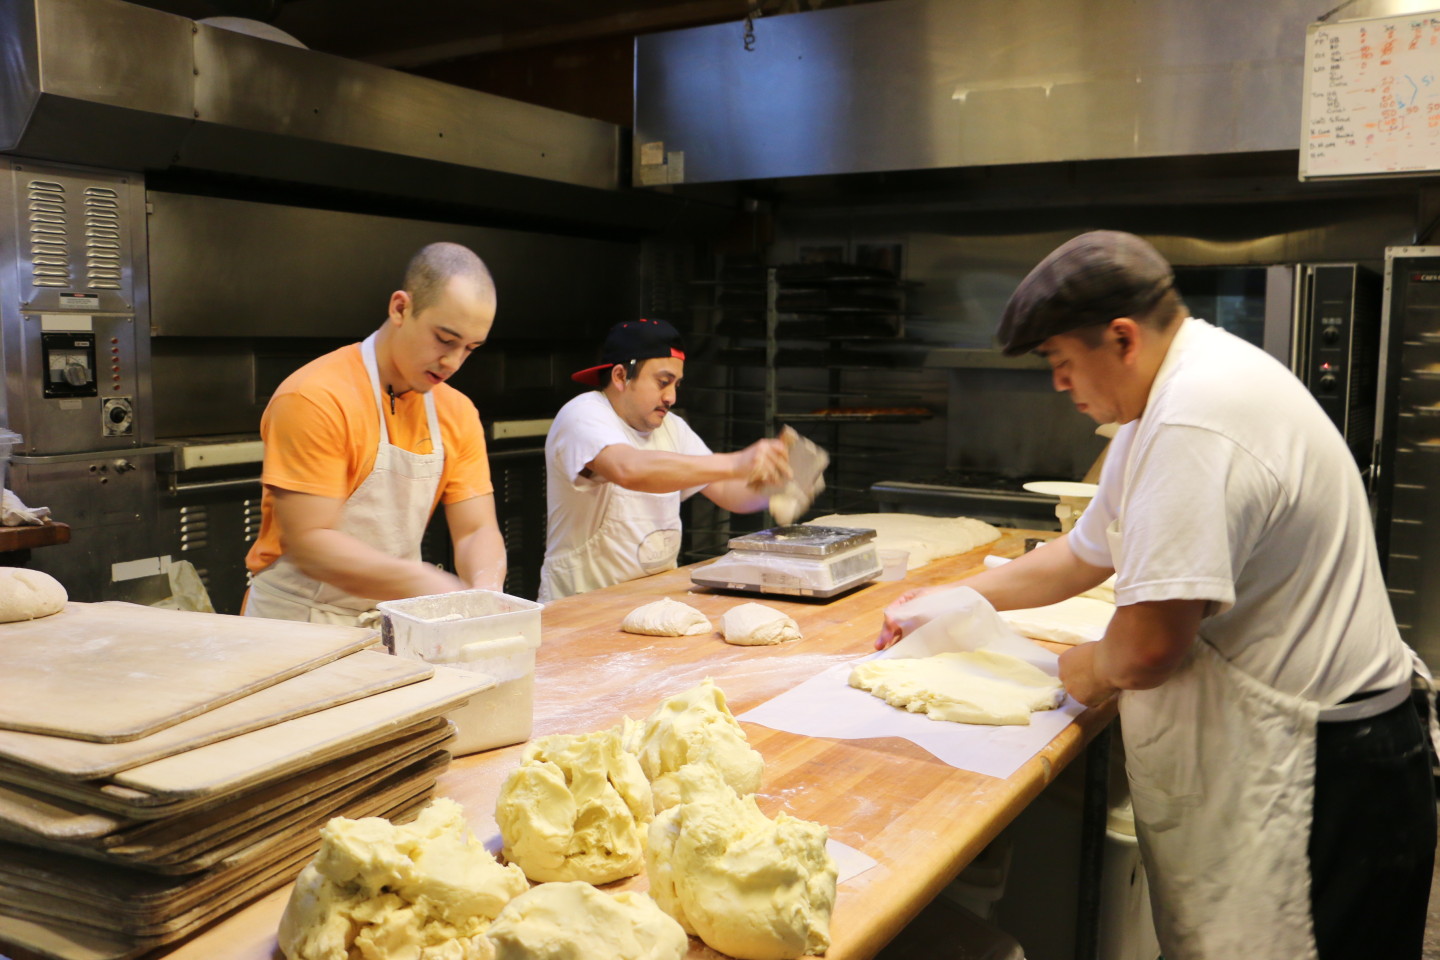 Maldonado brings in additional revenue by renting kitchen space to other bakers, (Joanne Elgart Jennings/KQED)